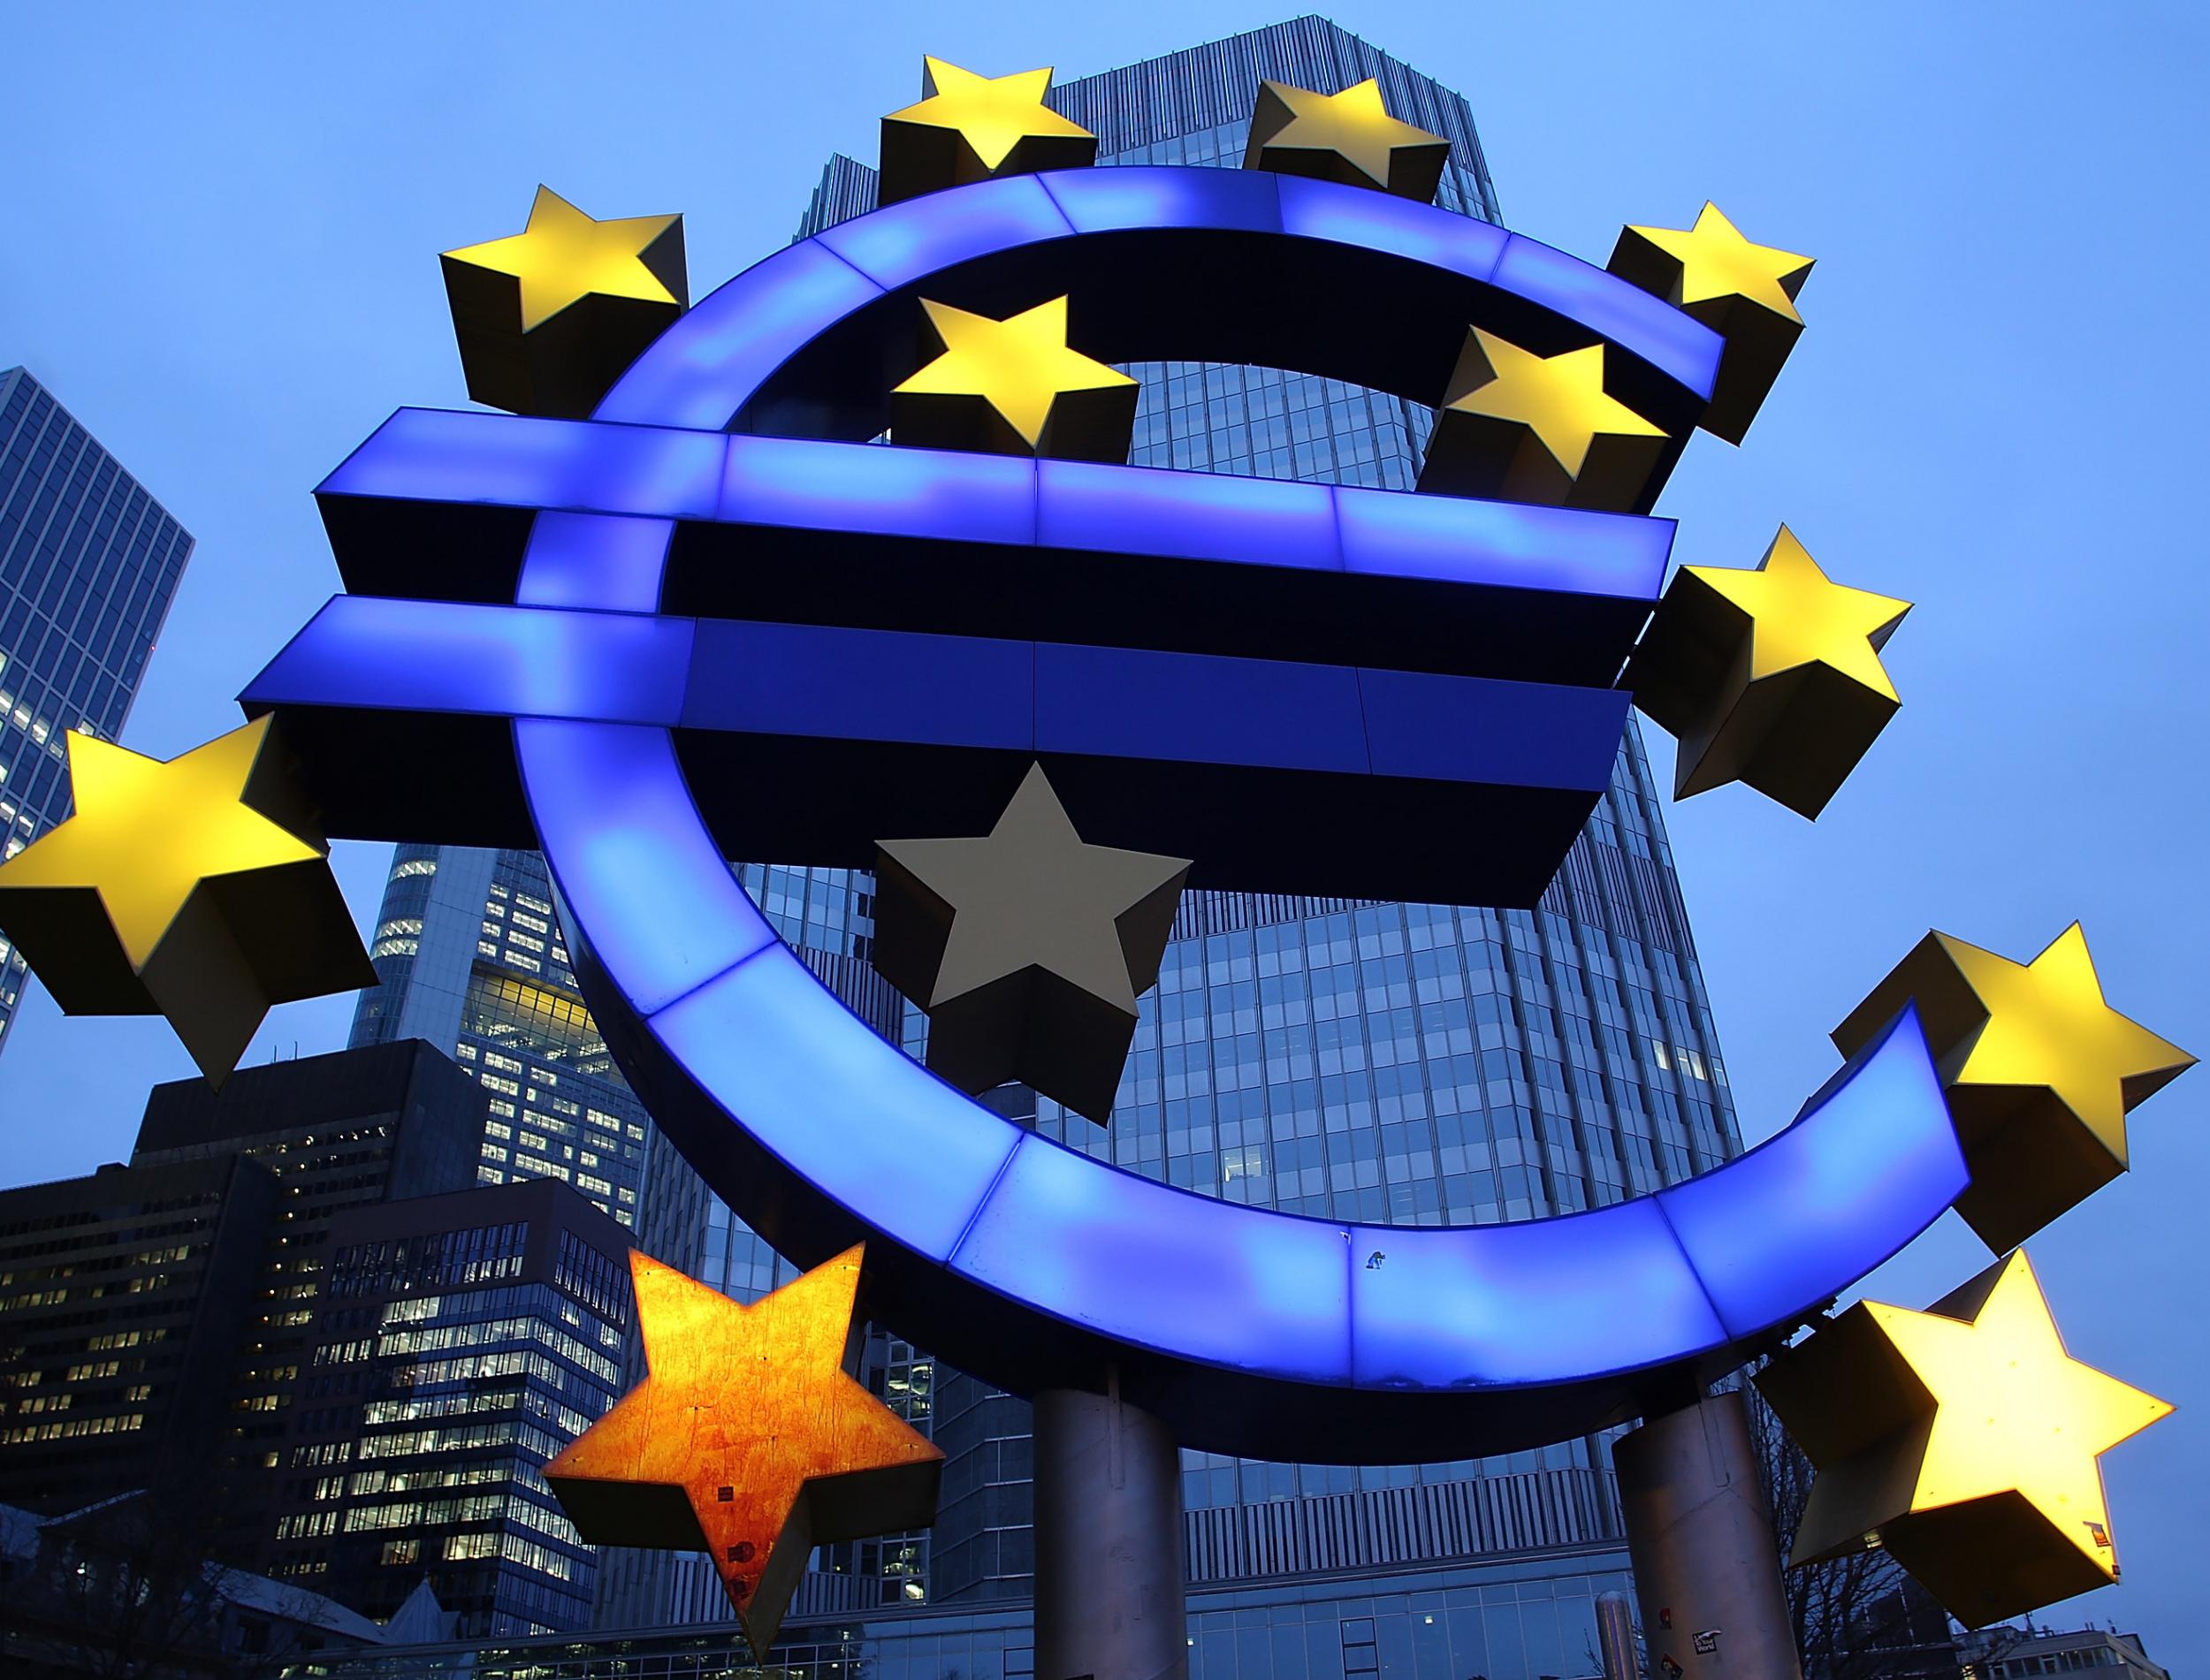 European Central Bank wakes up to digital currency 'concern'